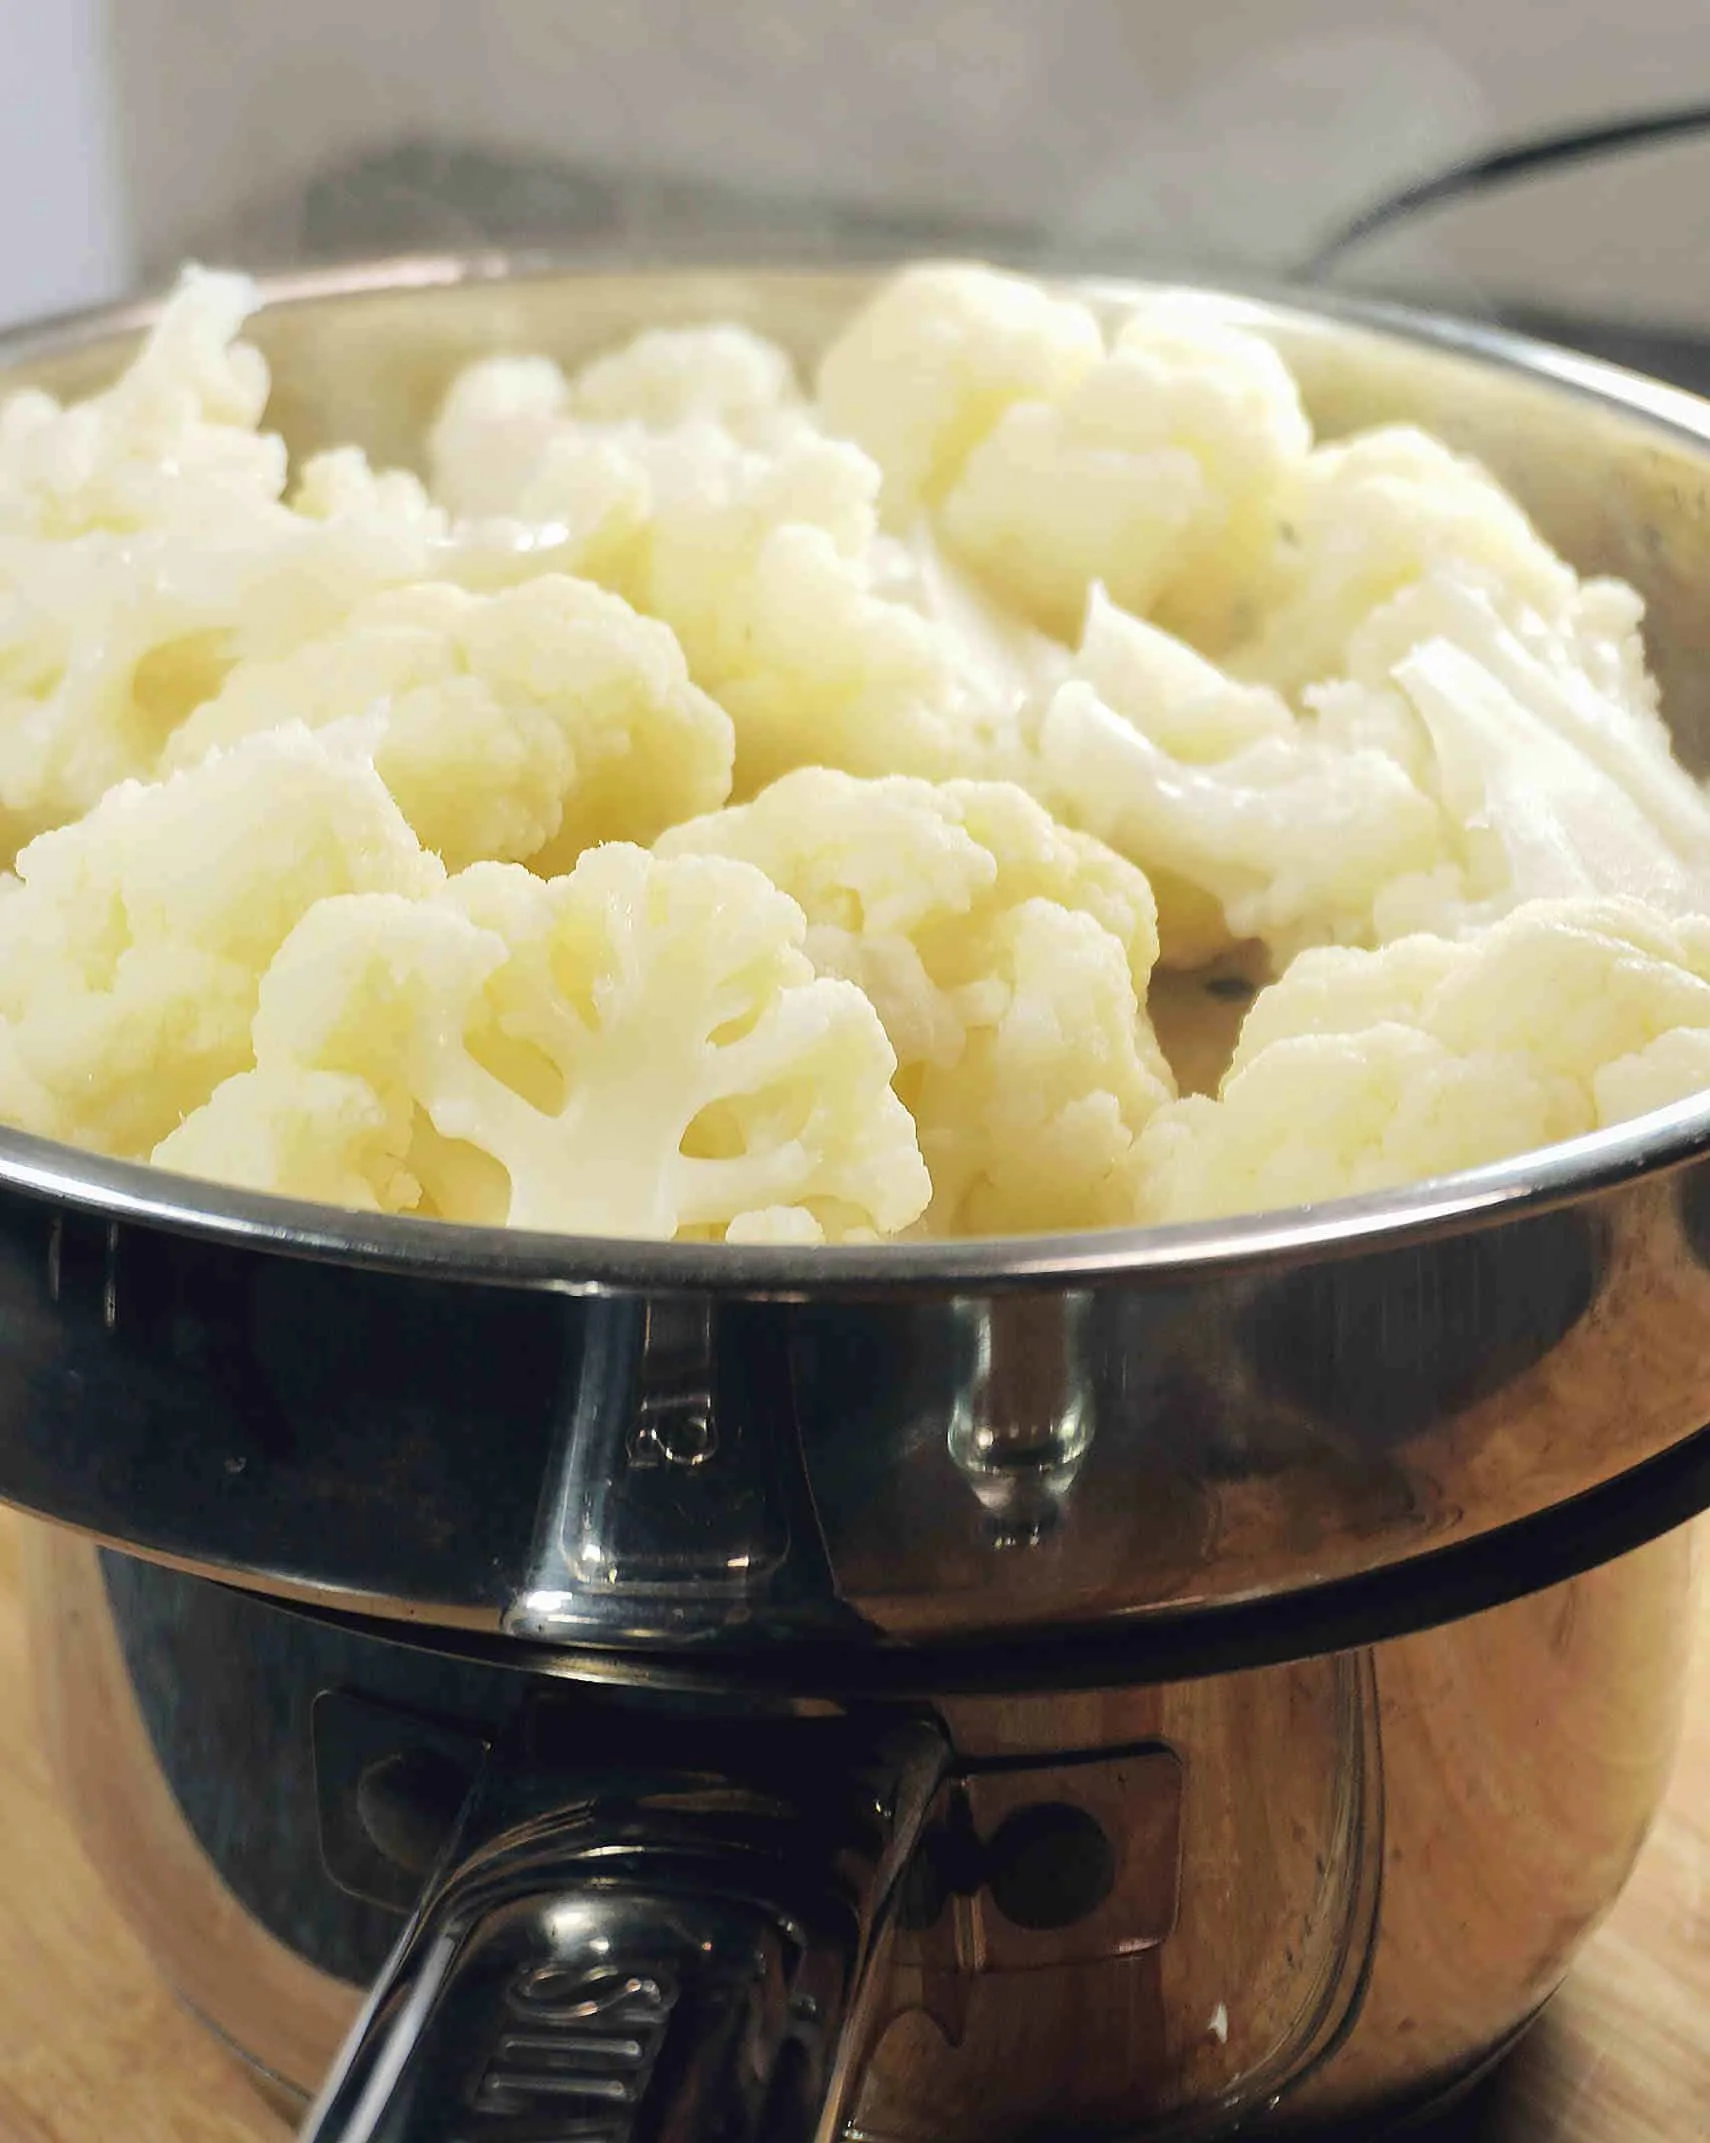 How to make cauliflower crackers or chips by steaming the cauliflower florets process shot.